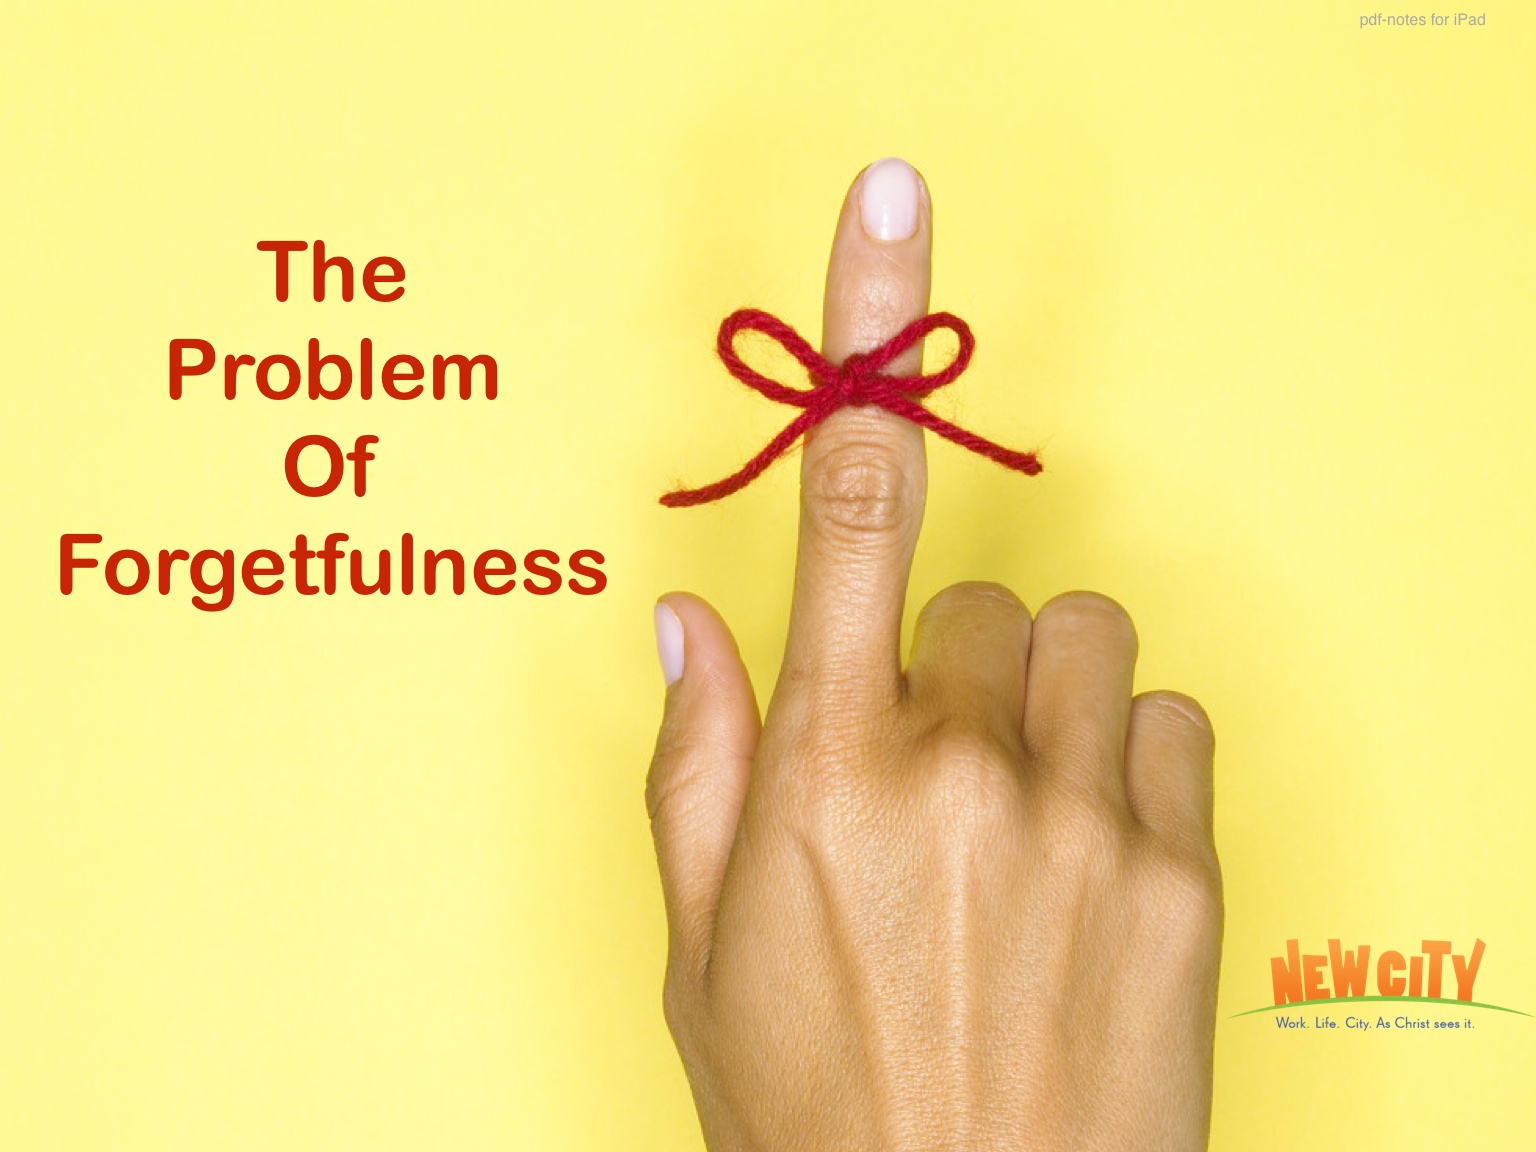 The Problem Of Forgetfulness Image